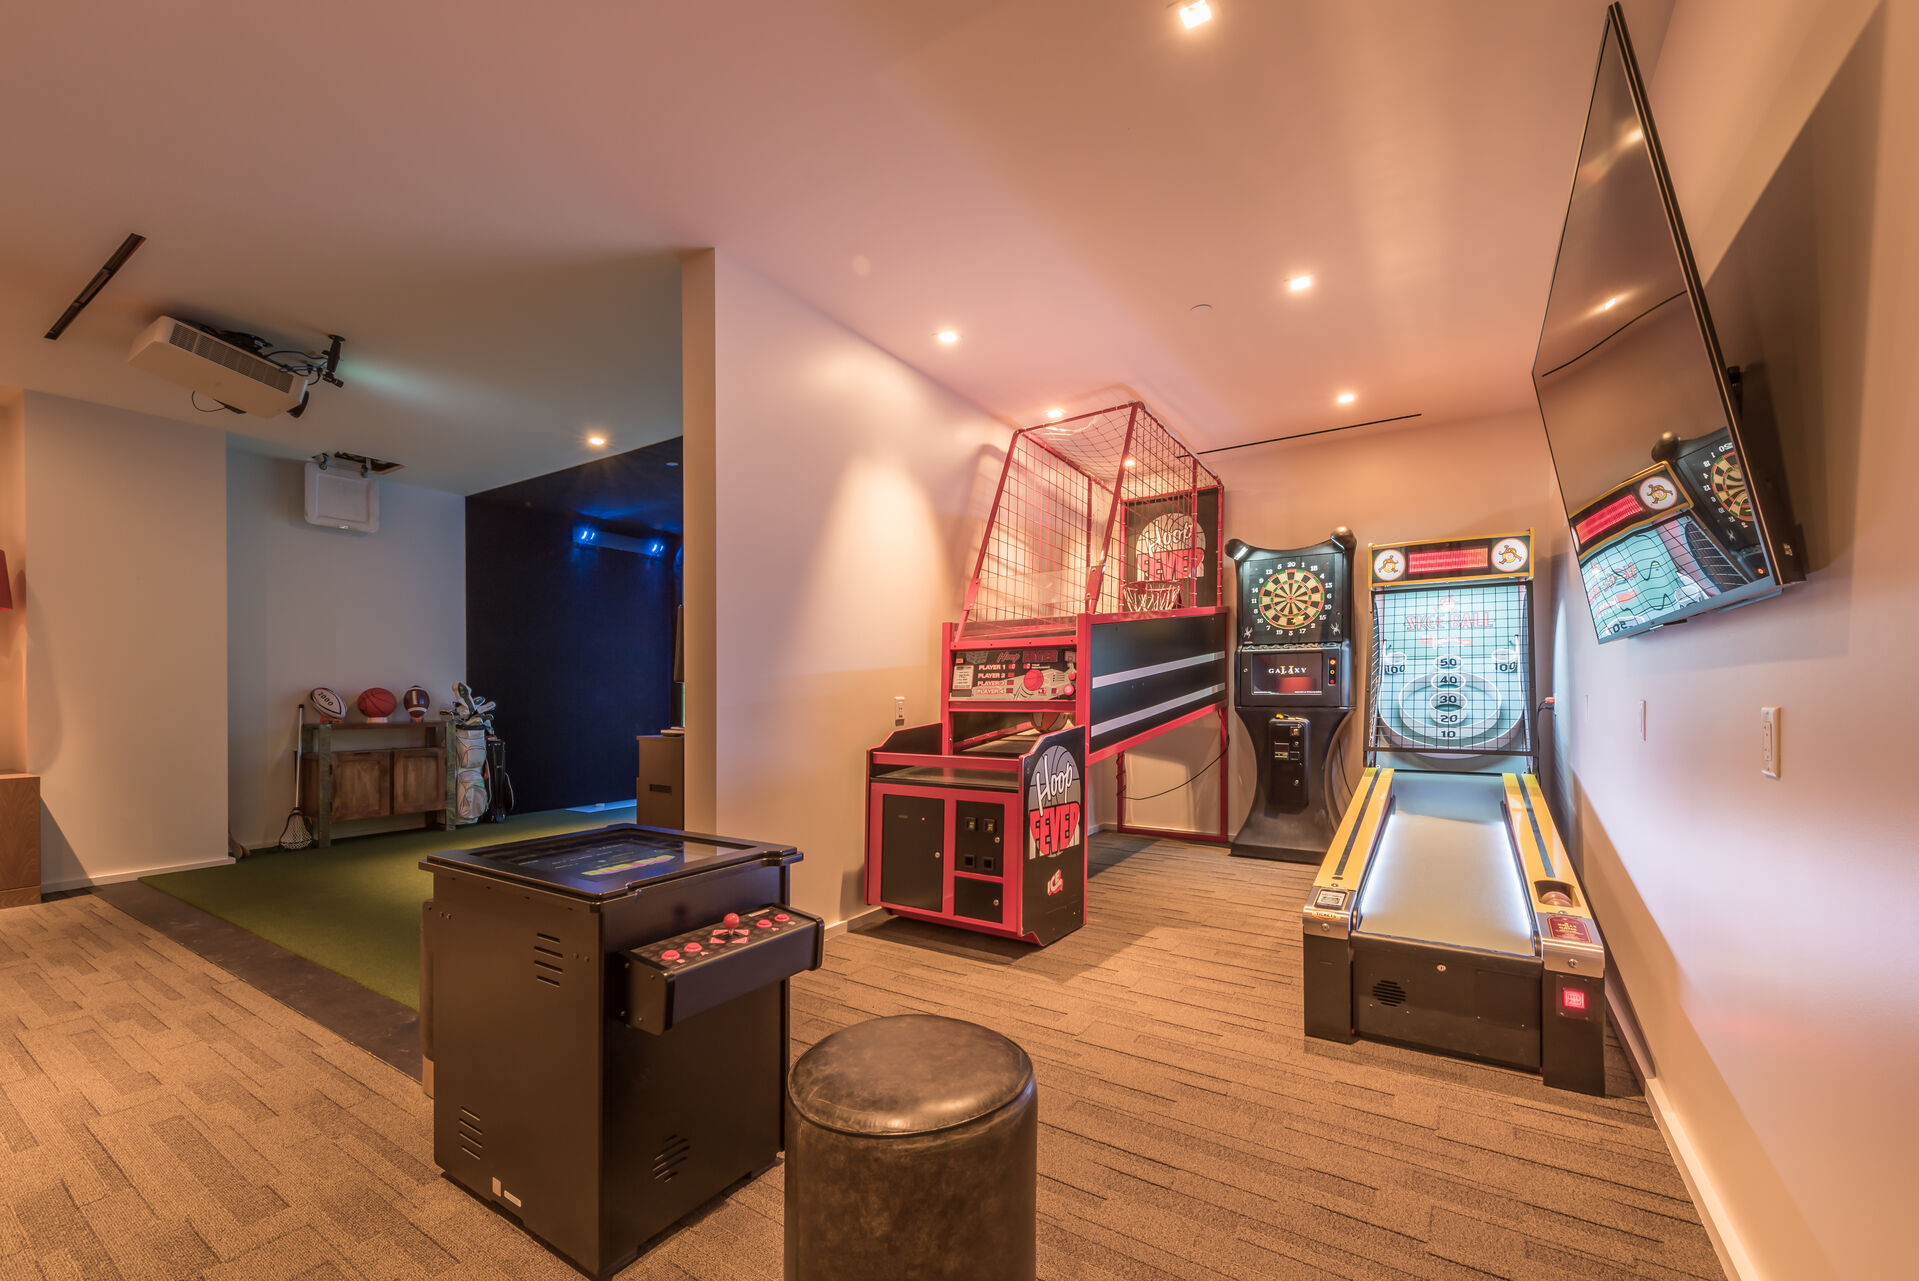 Game Room with Large Screen TV, Sports Simulator, Video Games, Basketball and Skeet Shooting